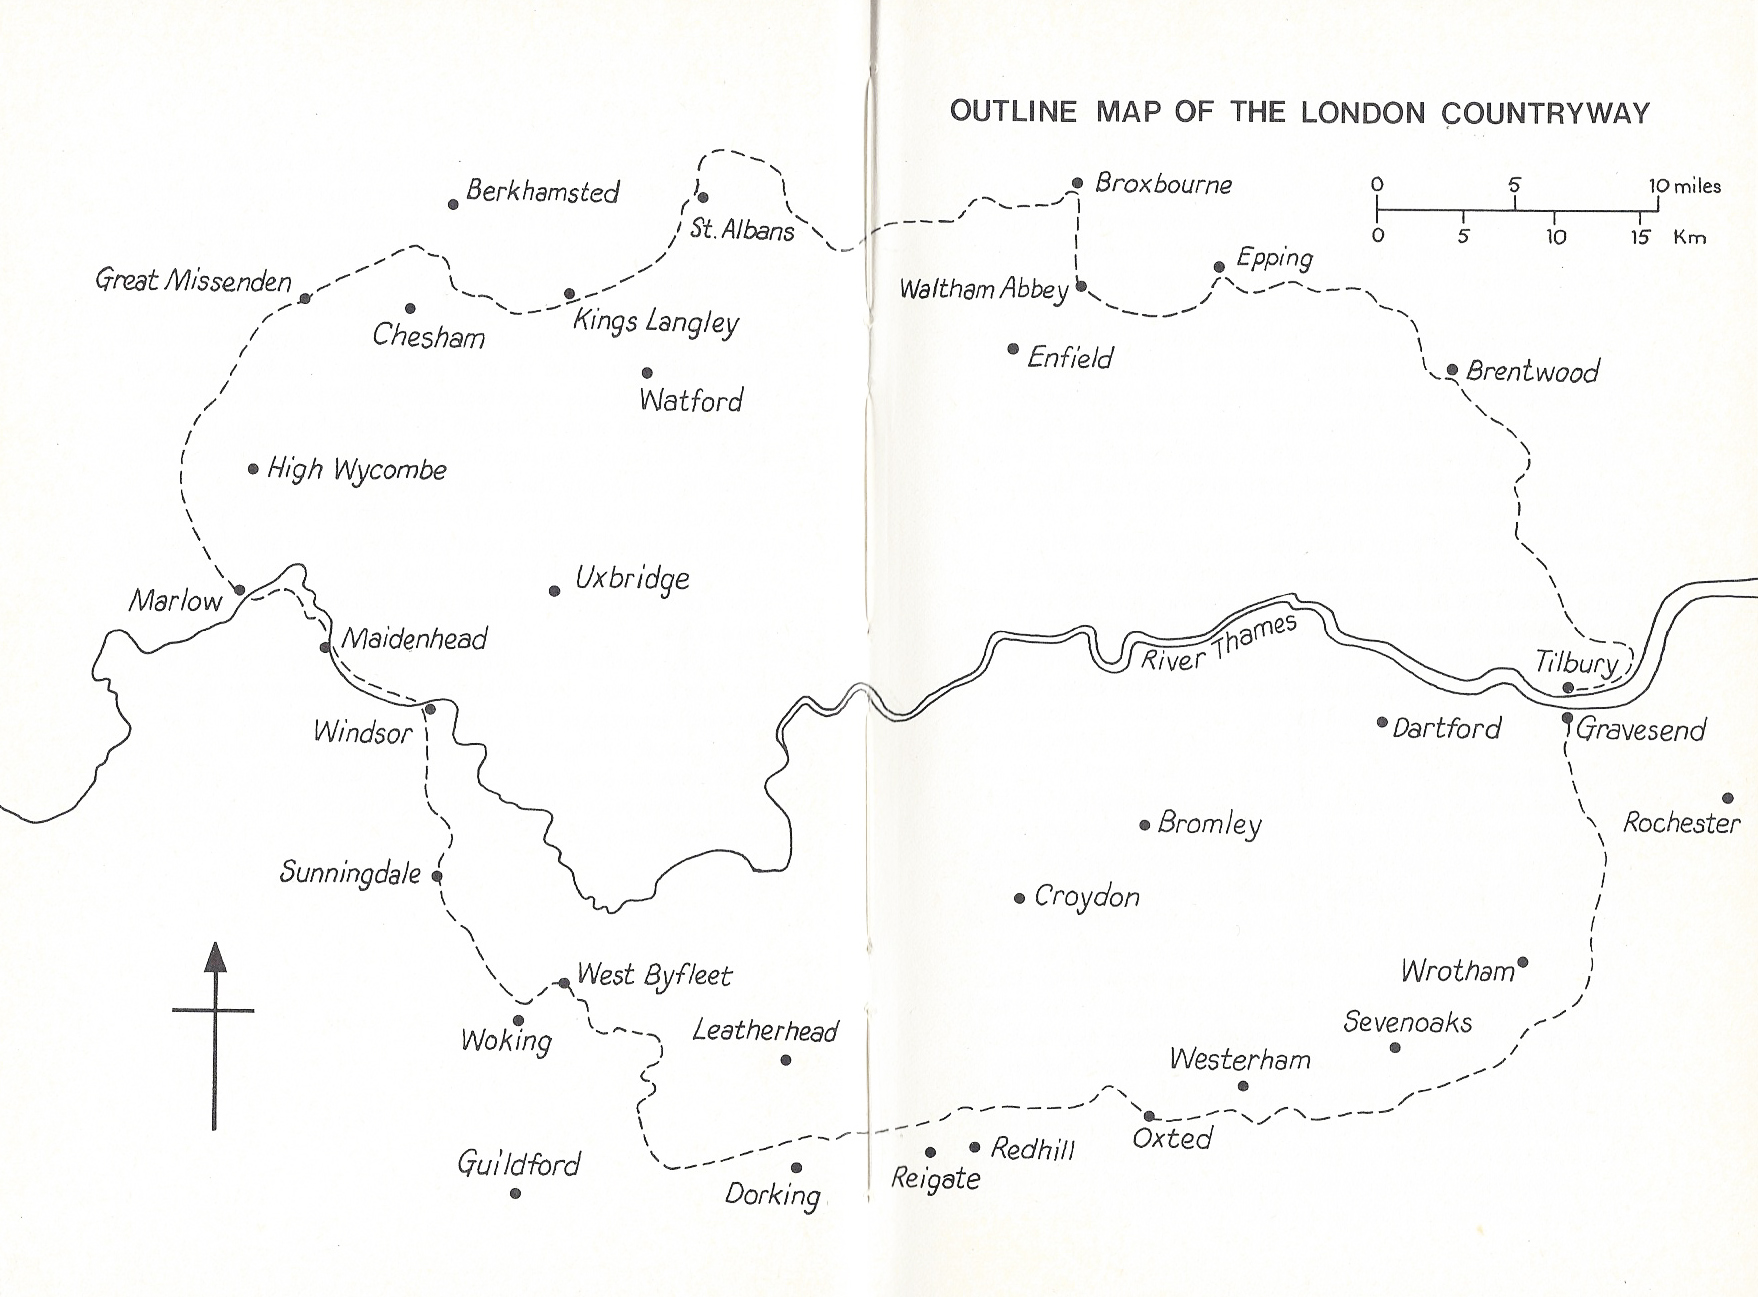 The London Countryway map as it appears in the Constable guide. My path follows a very close route